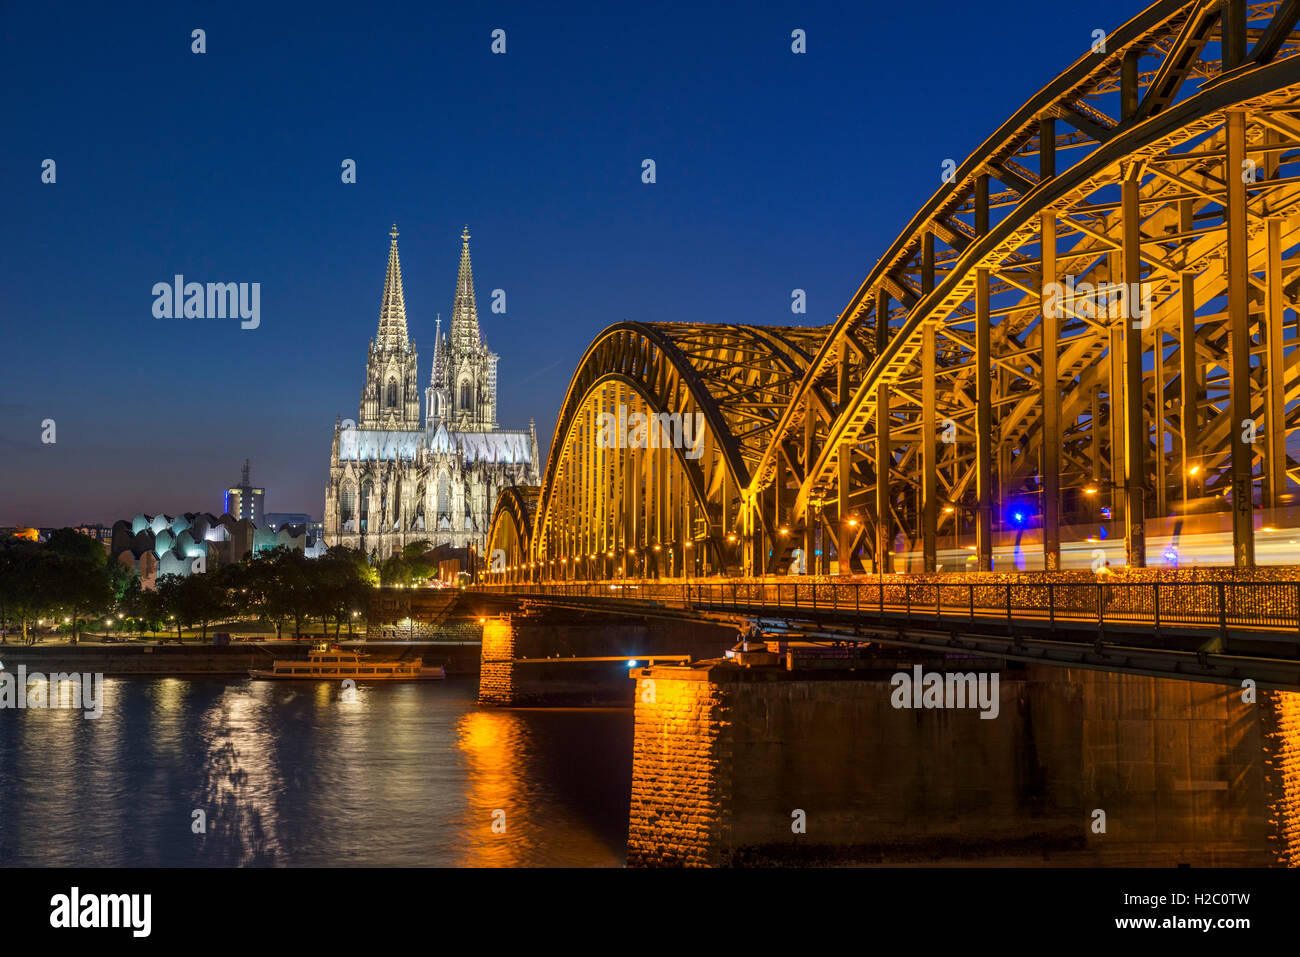 River Rhine at night, looking towards Cologne Cathedral with the Hohenzollern Bridge in the foreground, Cologne, Germany Stock Photo